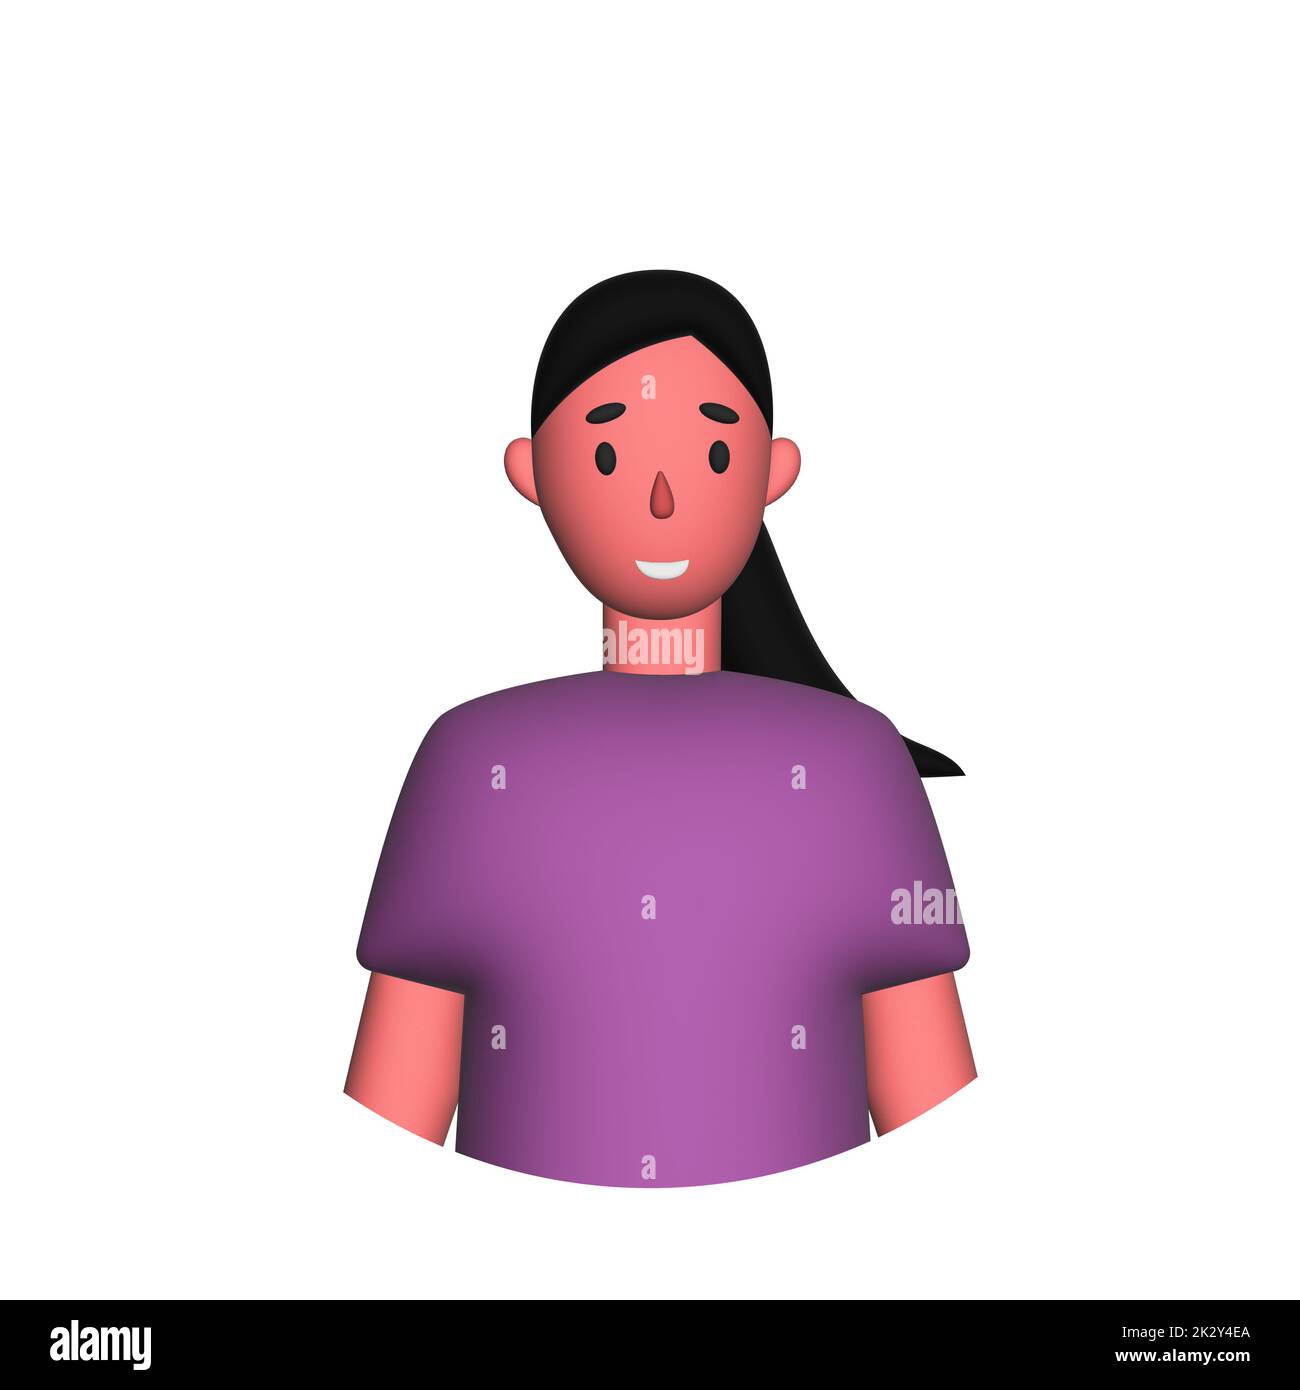 Web icon man, girl with a pigtail Stock Photo